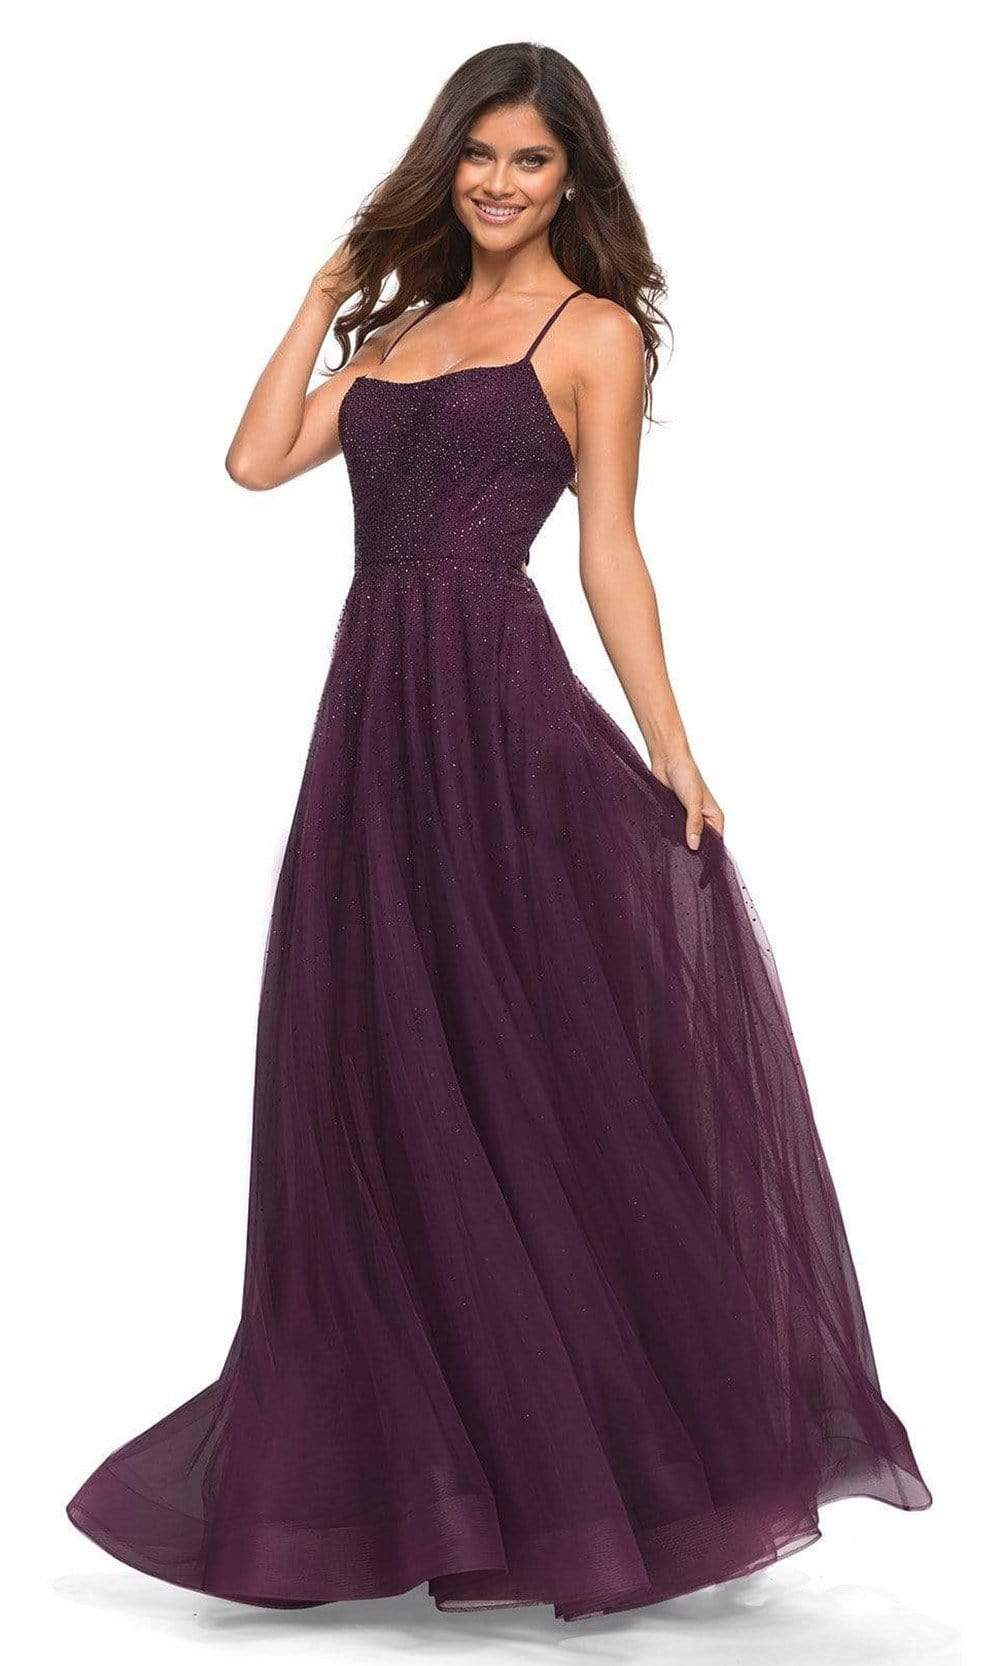 La Femme - 30581 Beaded Flowy A-line Gown Special Occasion Dress